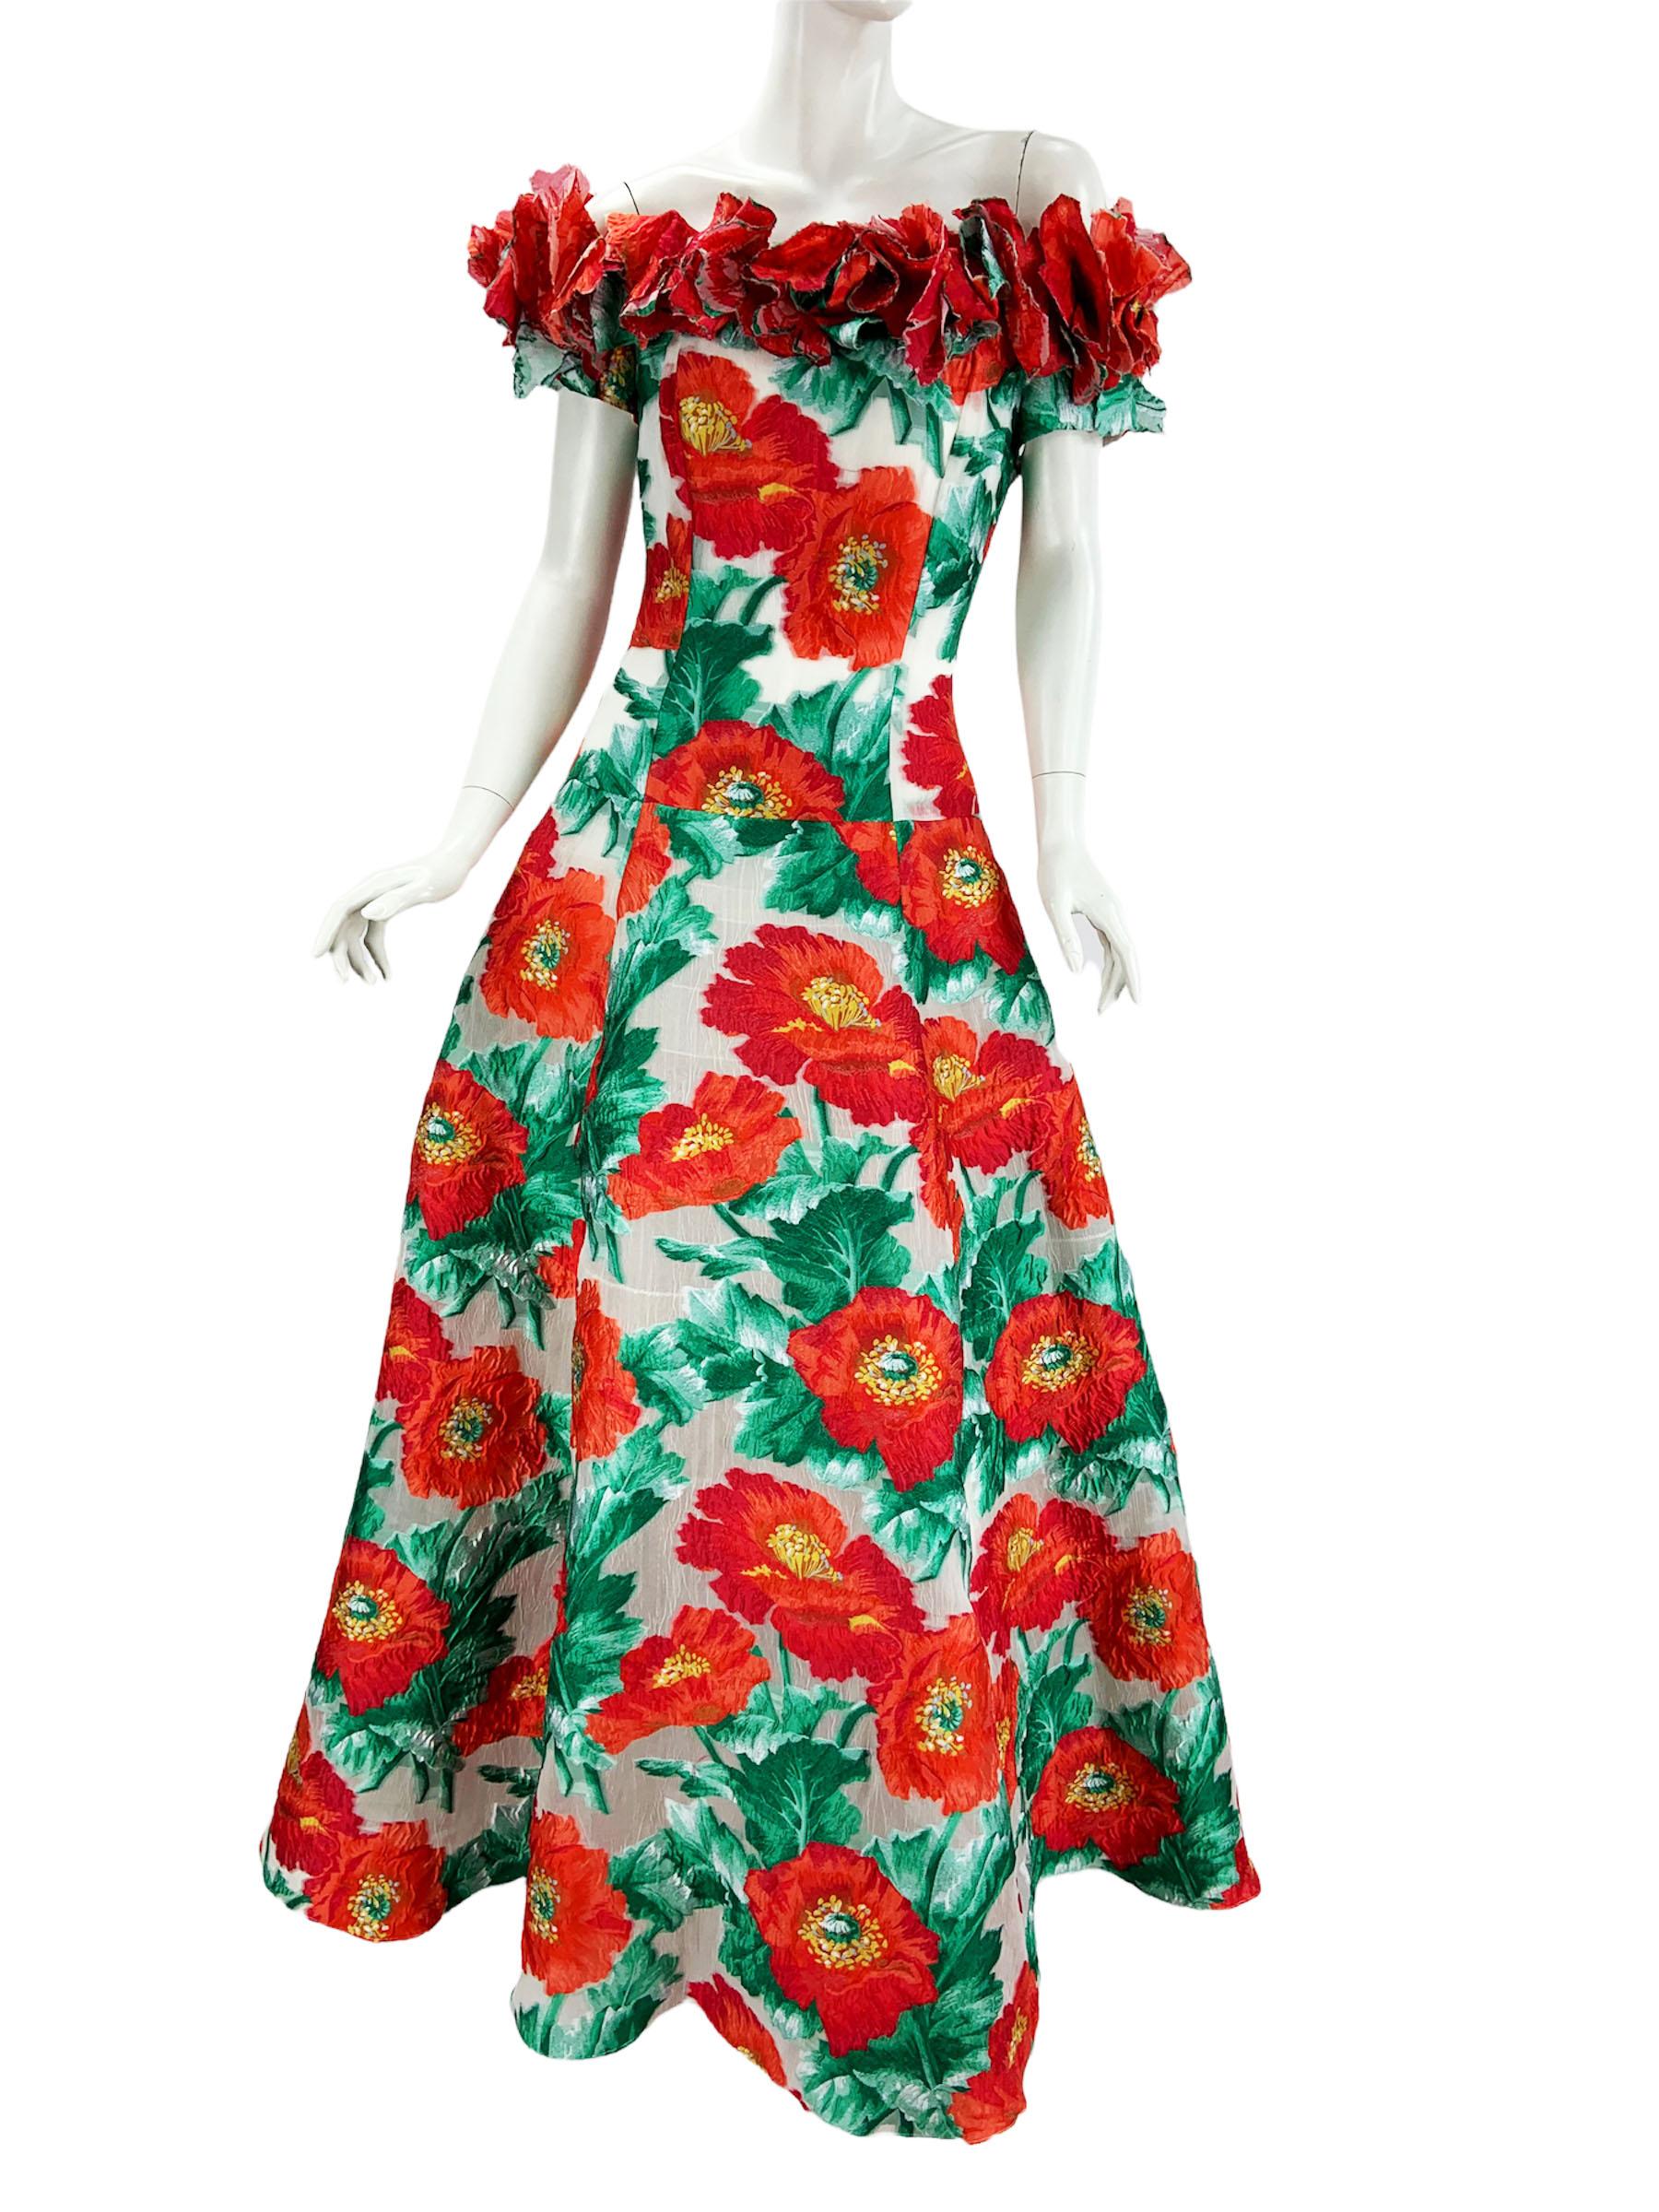 New Oscar De La Renta Poppy Flowers Off-Shoulder Dress Gown
P/F 2020 Collection
Designer US size - 6
62% Silk, 30% Polyester, 8% Nylon. Lining - 100% Silk. 
Three Dimensional Poppy Flowers with Green Leaves makes Illusion of Being Real. 
Finished